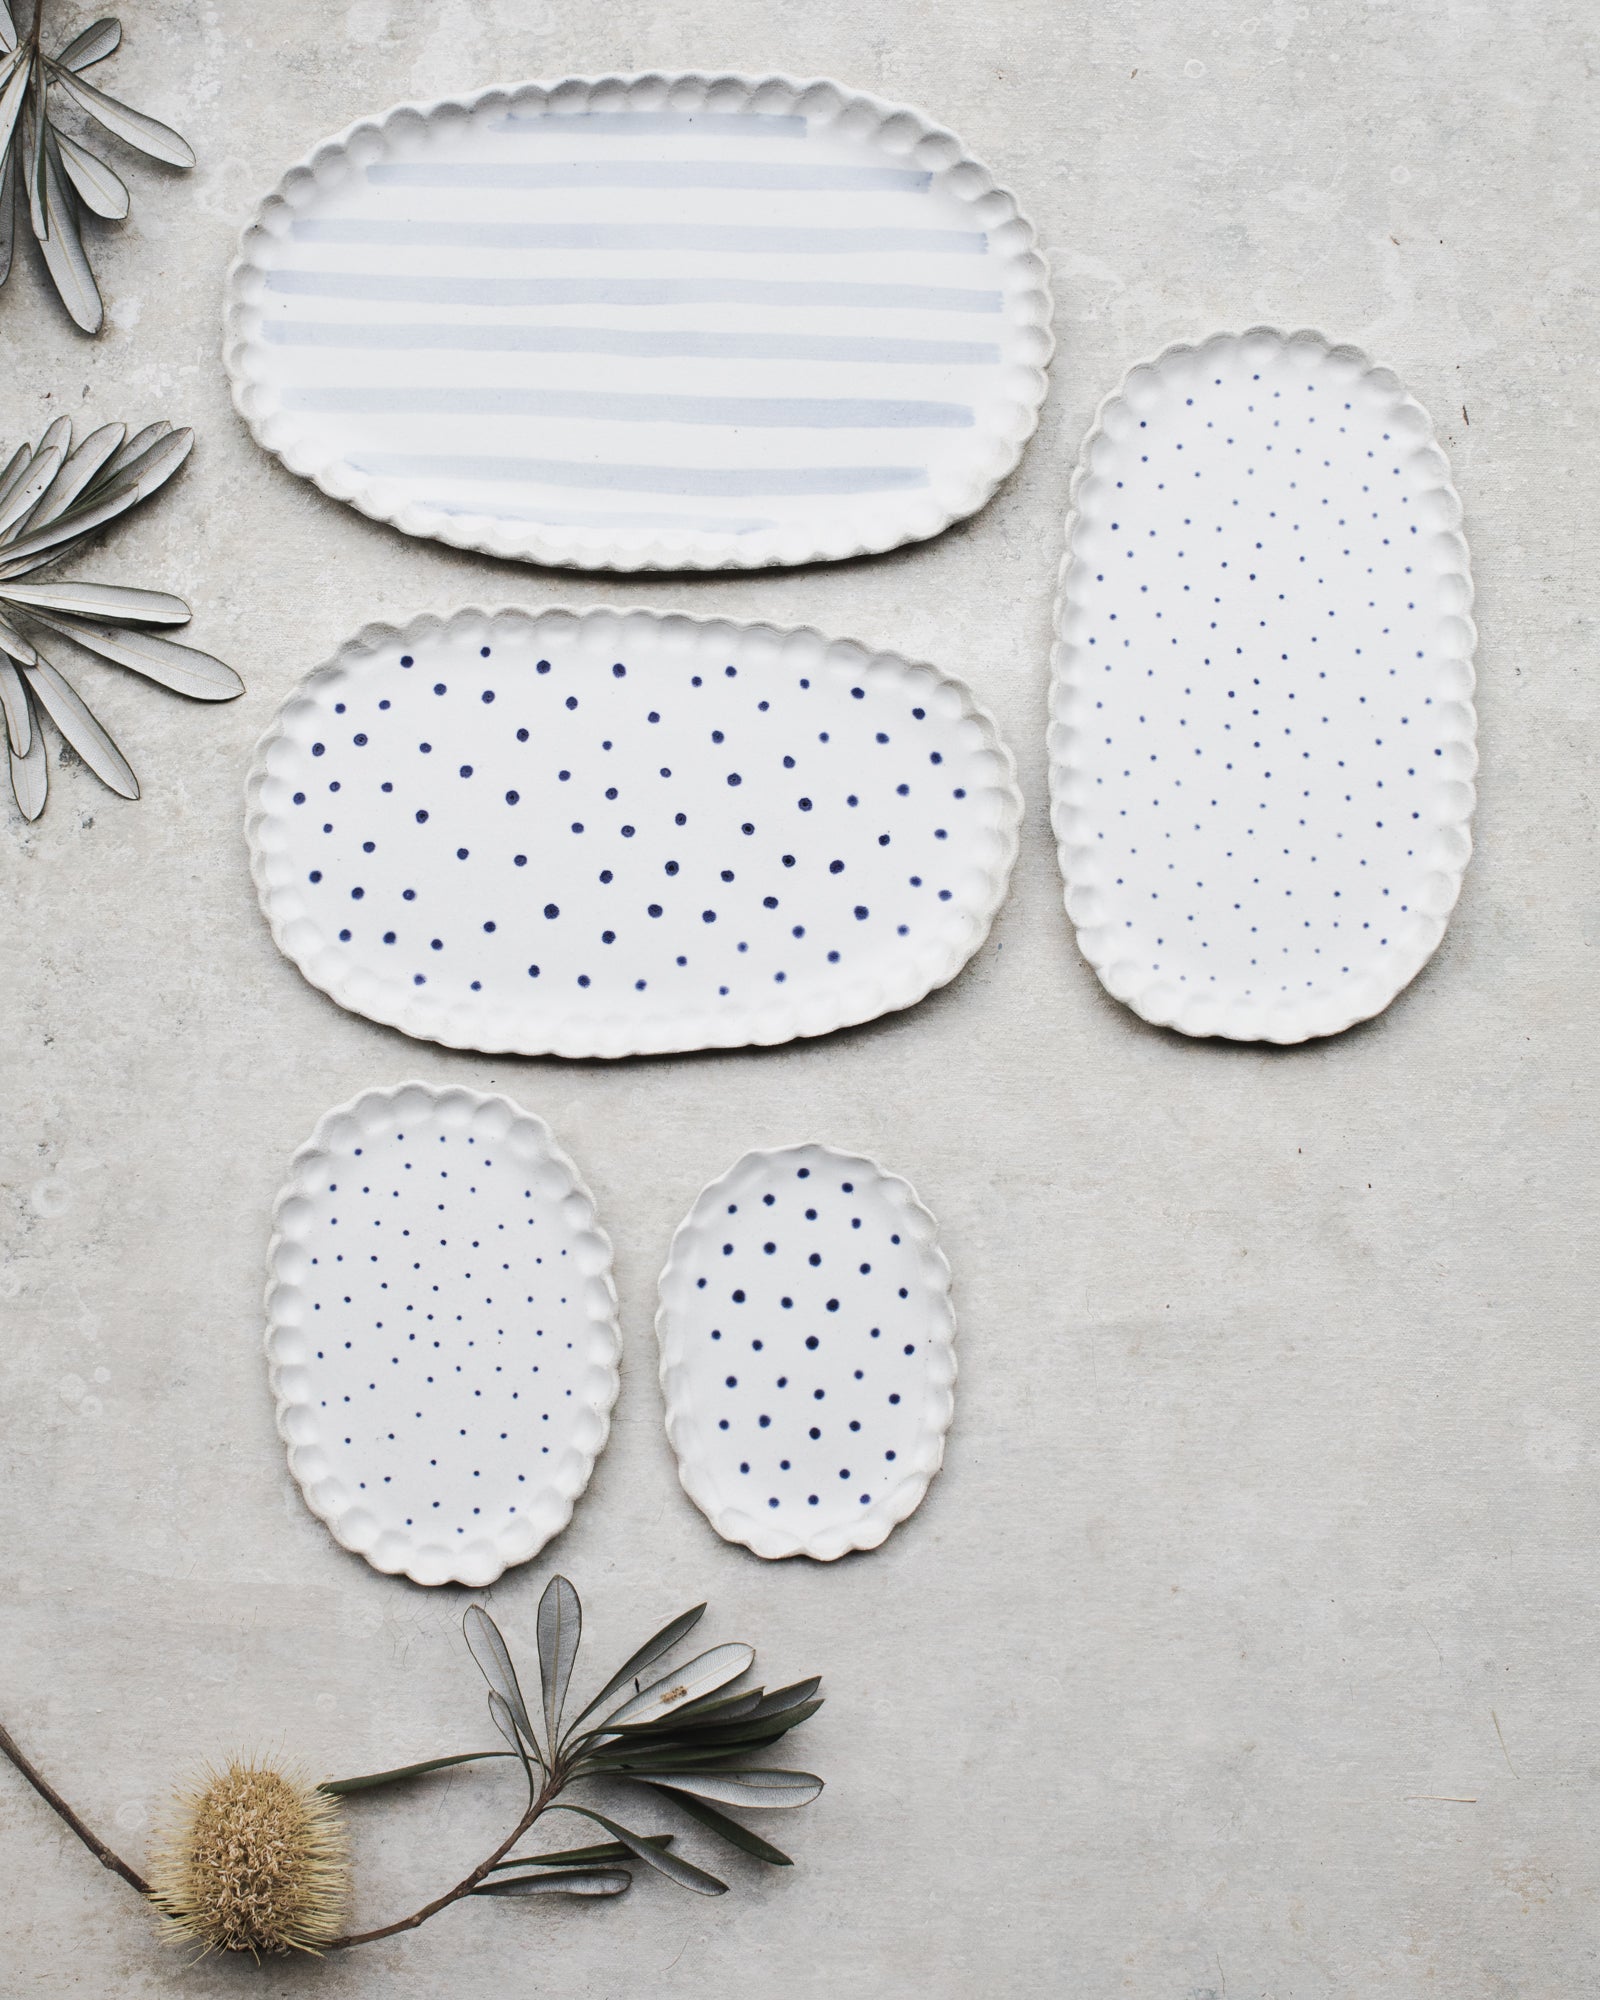 Scalloped rim blue and white spot and lines oval shaped plates by clay beehive ceramics